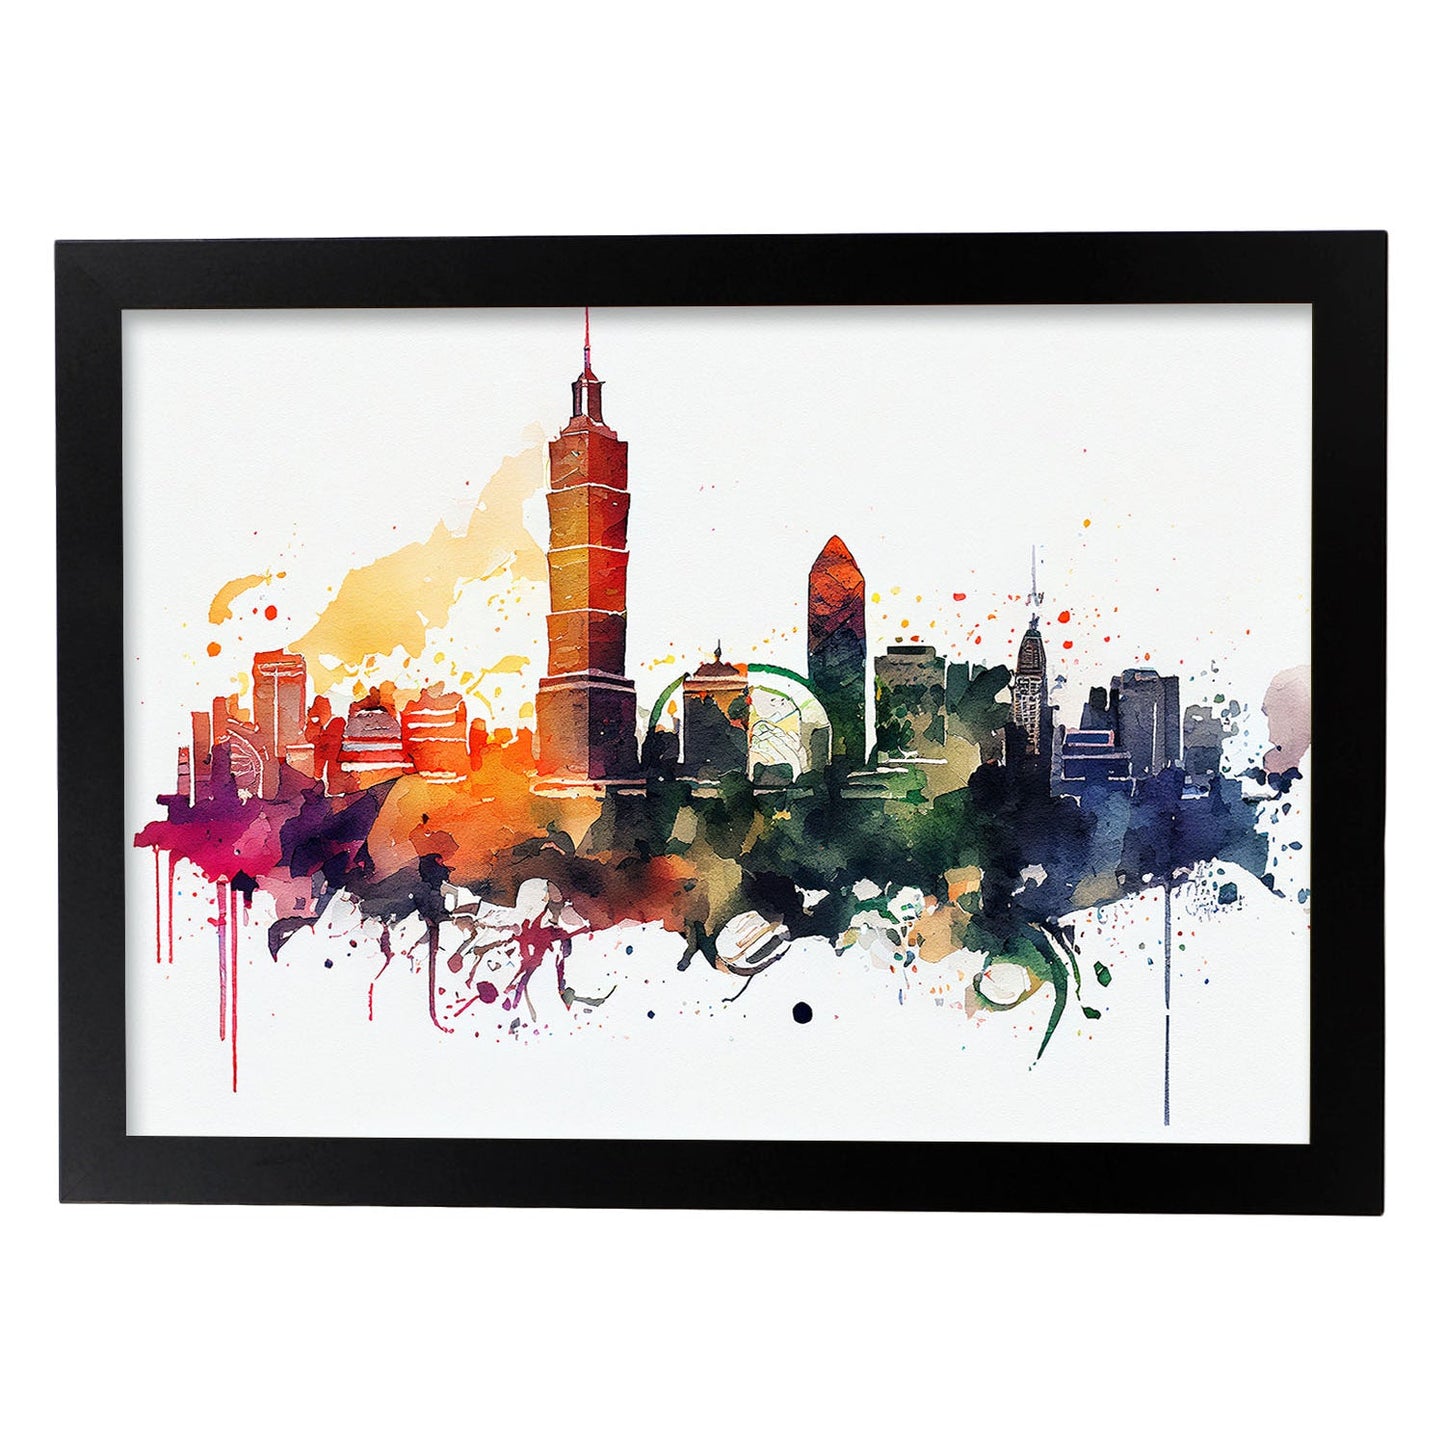 Nacnic watercolor of a skyline of the city of Taipei. Aesthetic Wall Art Prints for Bedroom or Living Room Design.